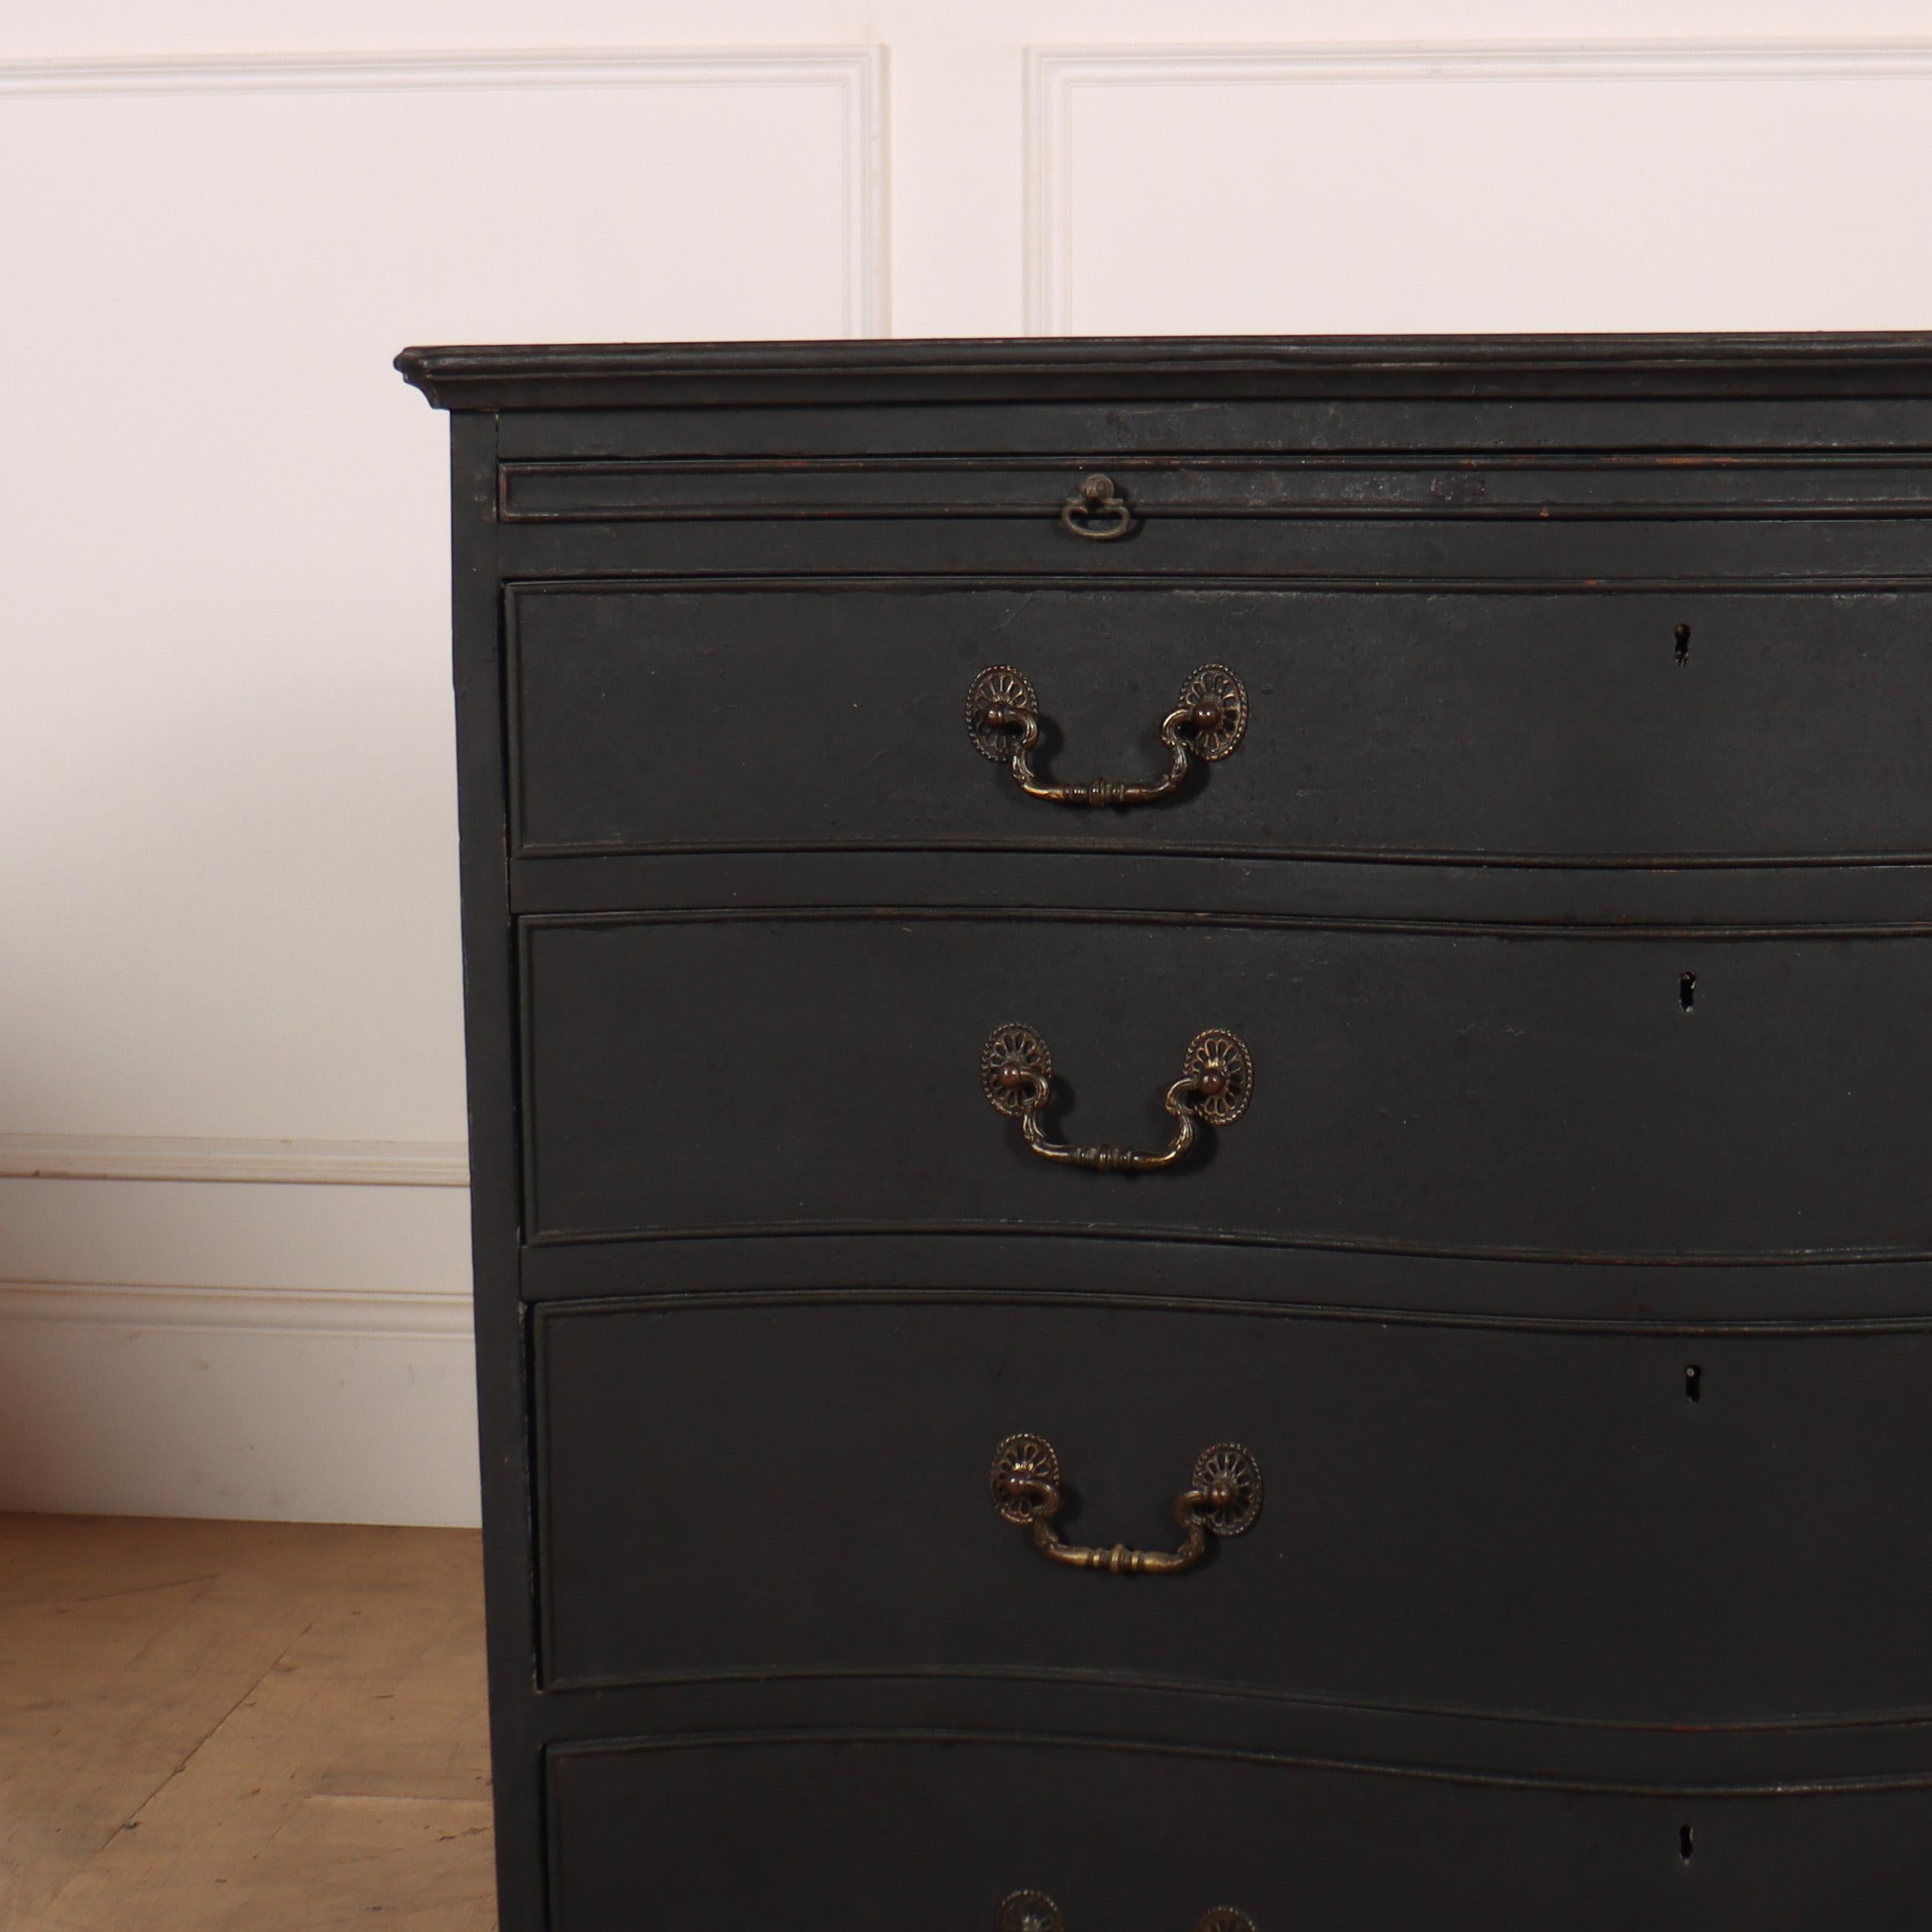 Late 19th C English painted serpentine front 4 drawer oak commode. 1890.

Reference: 8023

Dimensions
36 inches (91 cms) Wide
21.5 inches (55 cms) Deep
33 inches (84 cms) High